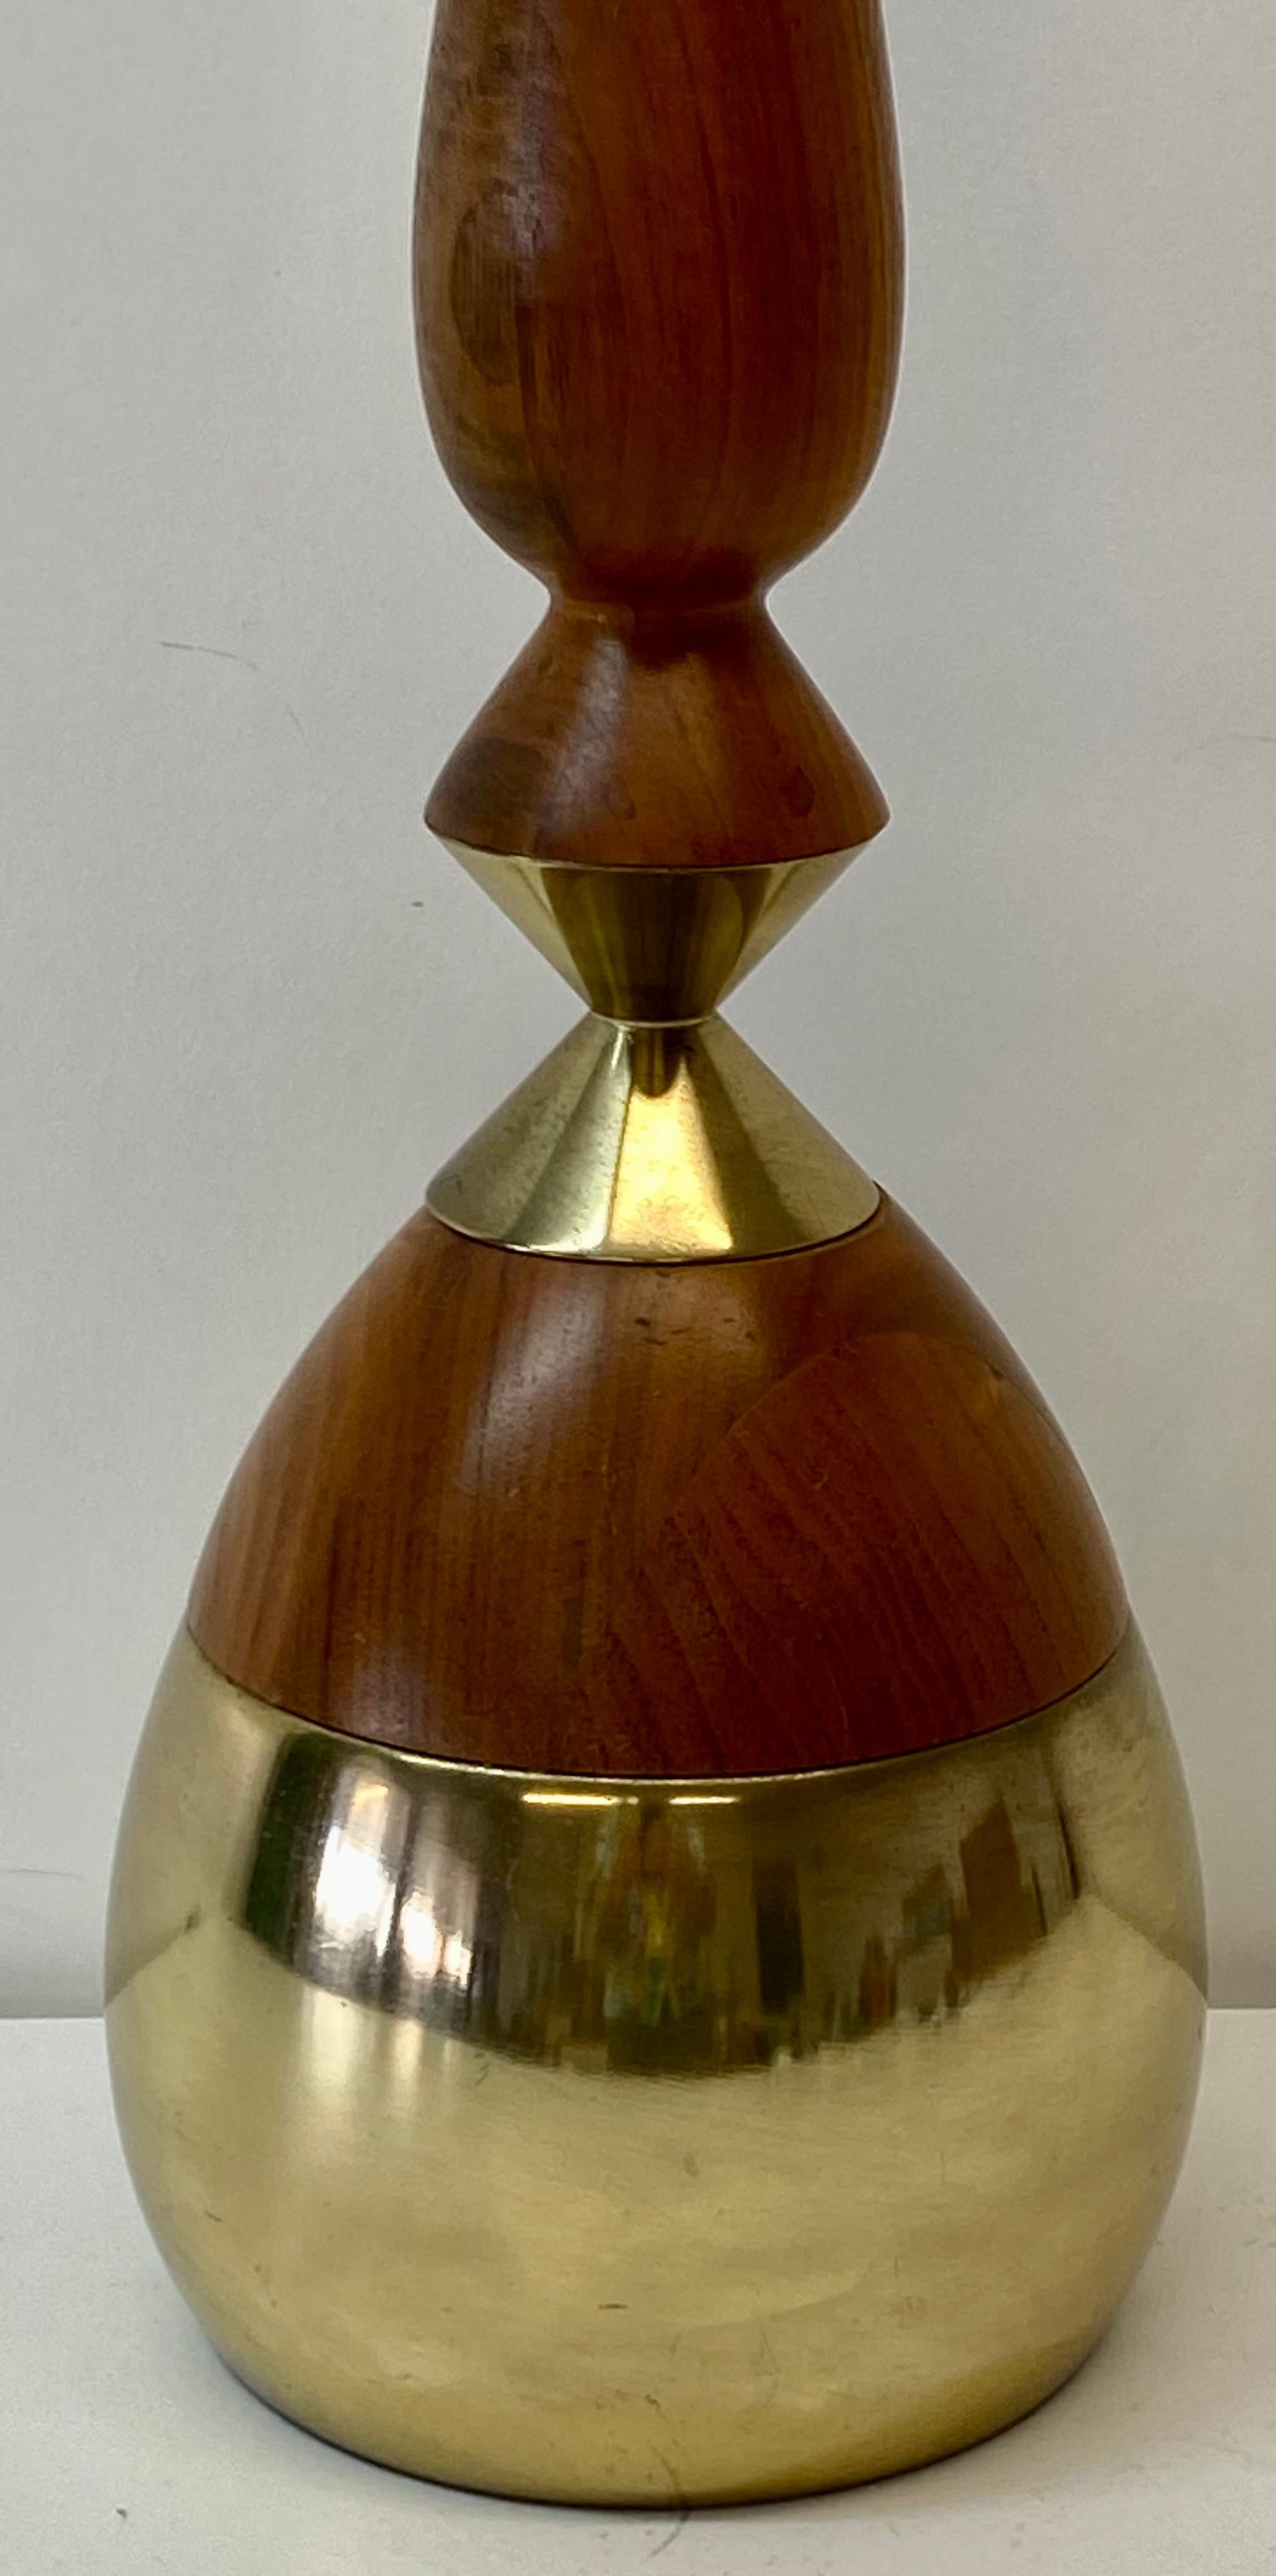 Mid-Century Modern brass and walnut table lamp, circa 1960

Bulbous brass base with a walnut neck

Very sleek and elegant

Measures: 6